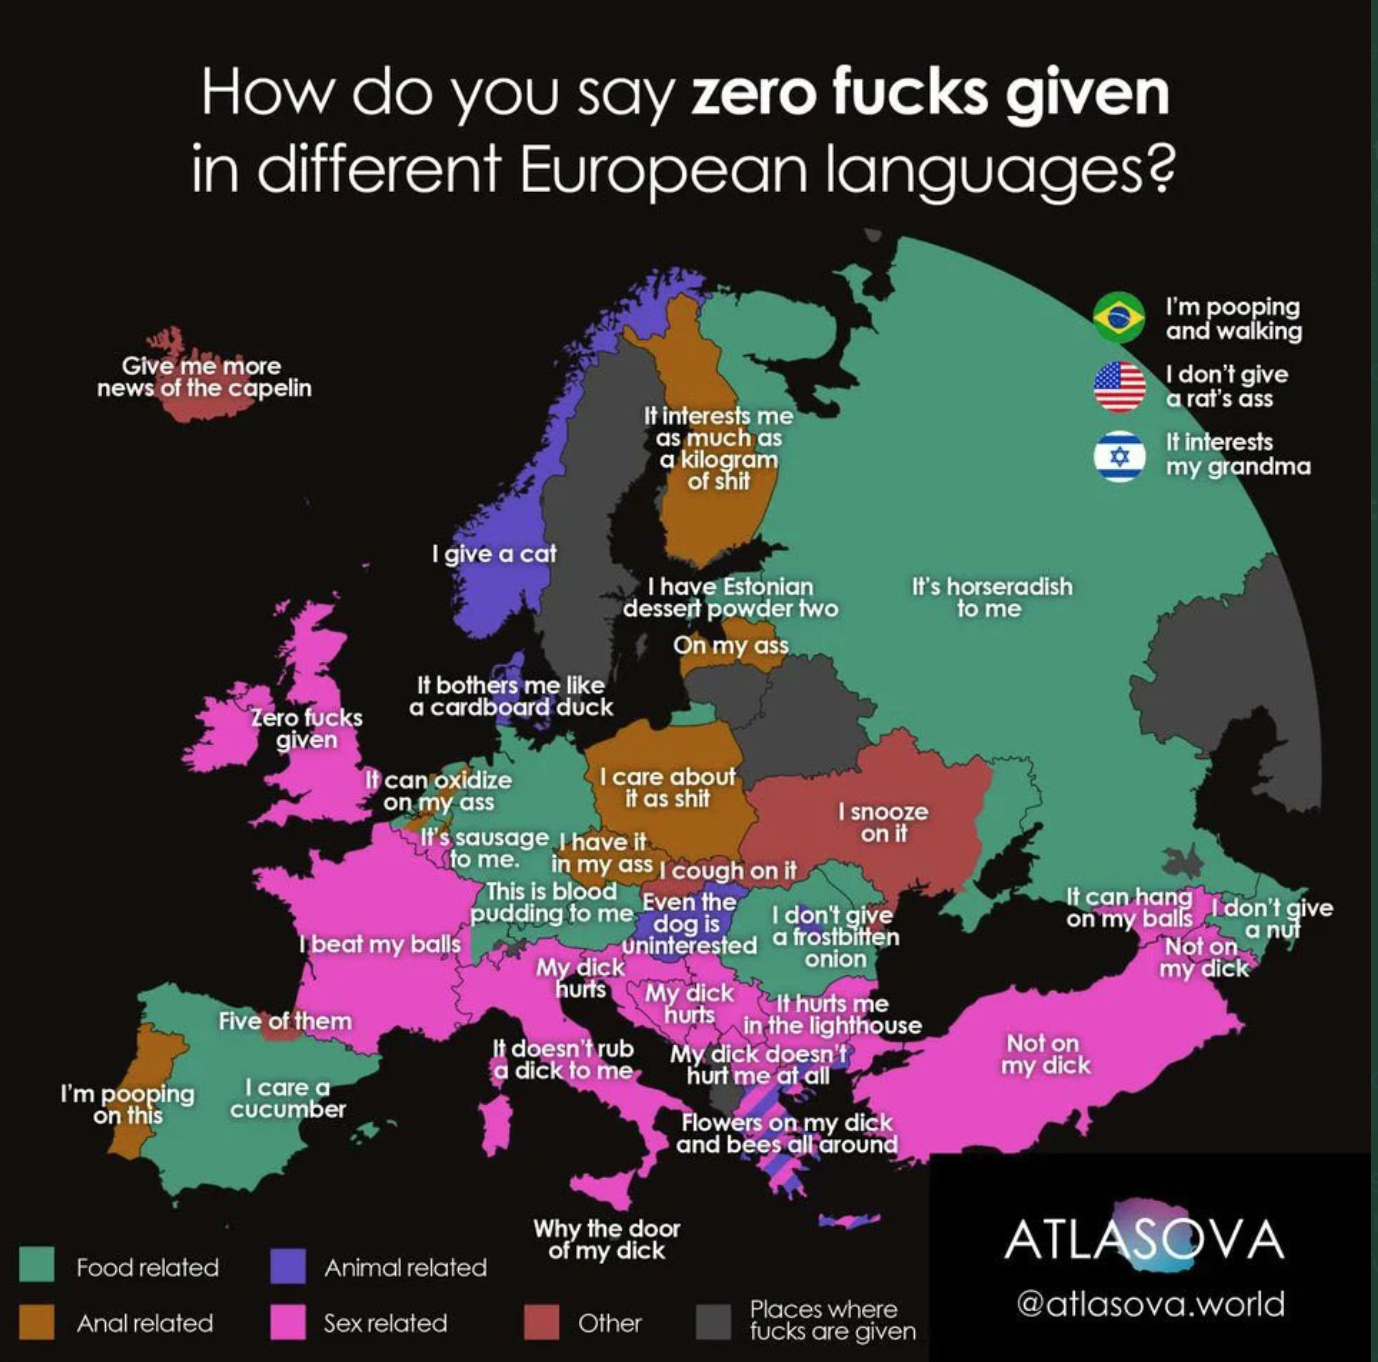 A map of europe, color coded by the way that a person would say ZERO FUCKS GIVEN (categories include food related, anal related, animal related, sex related, other, and places where fucks are given). Then it goes into greater detail with the specific phrases. It comes from a website called atlasova.world